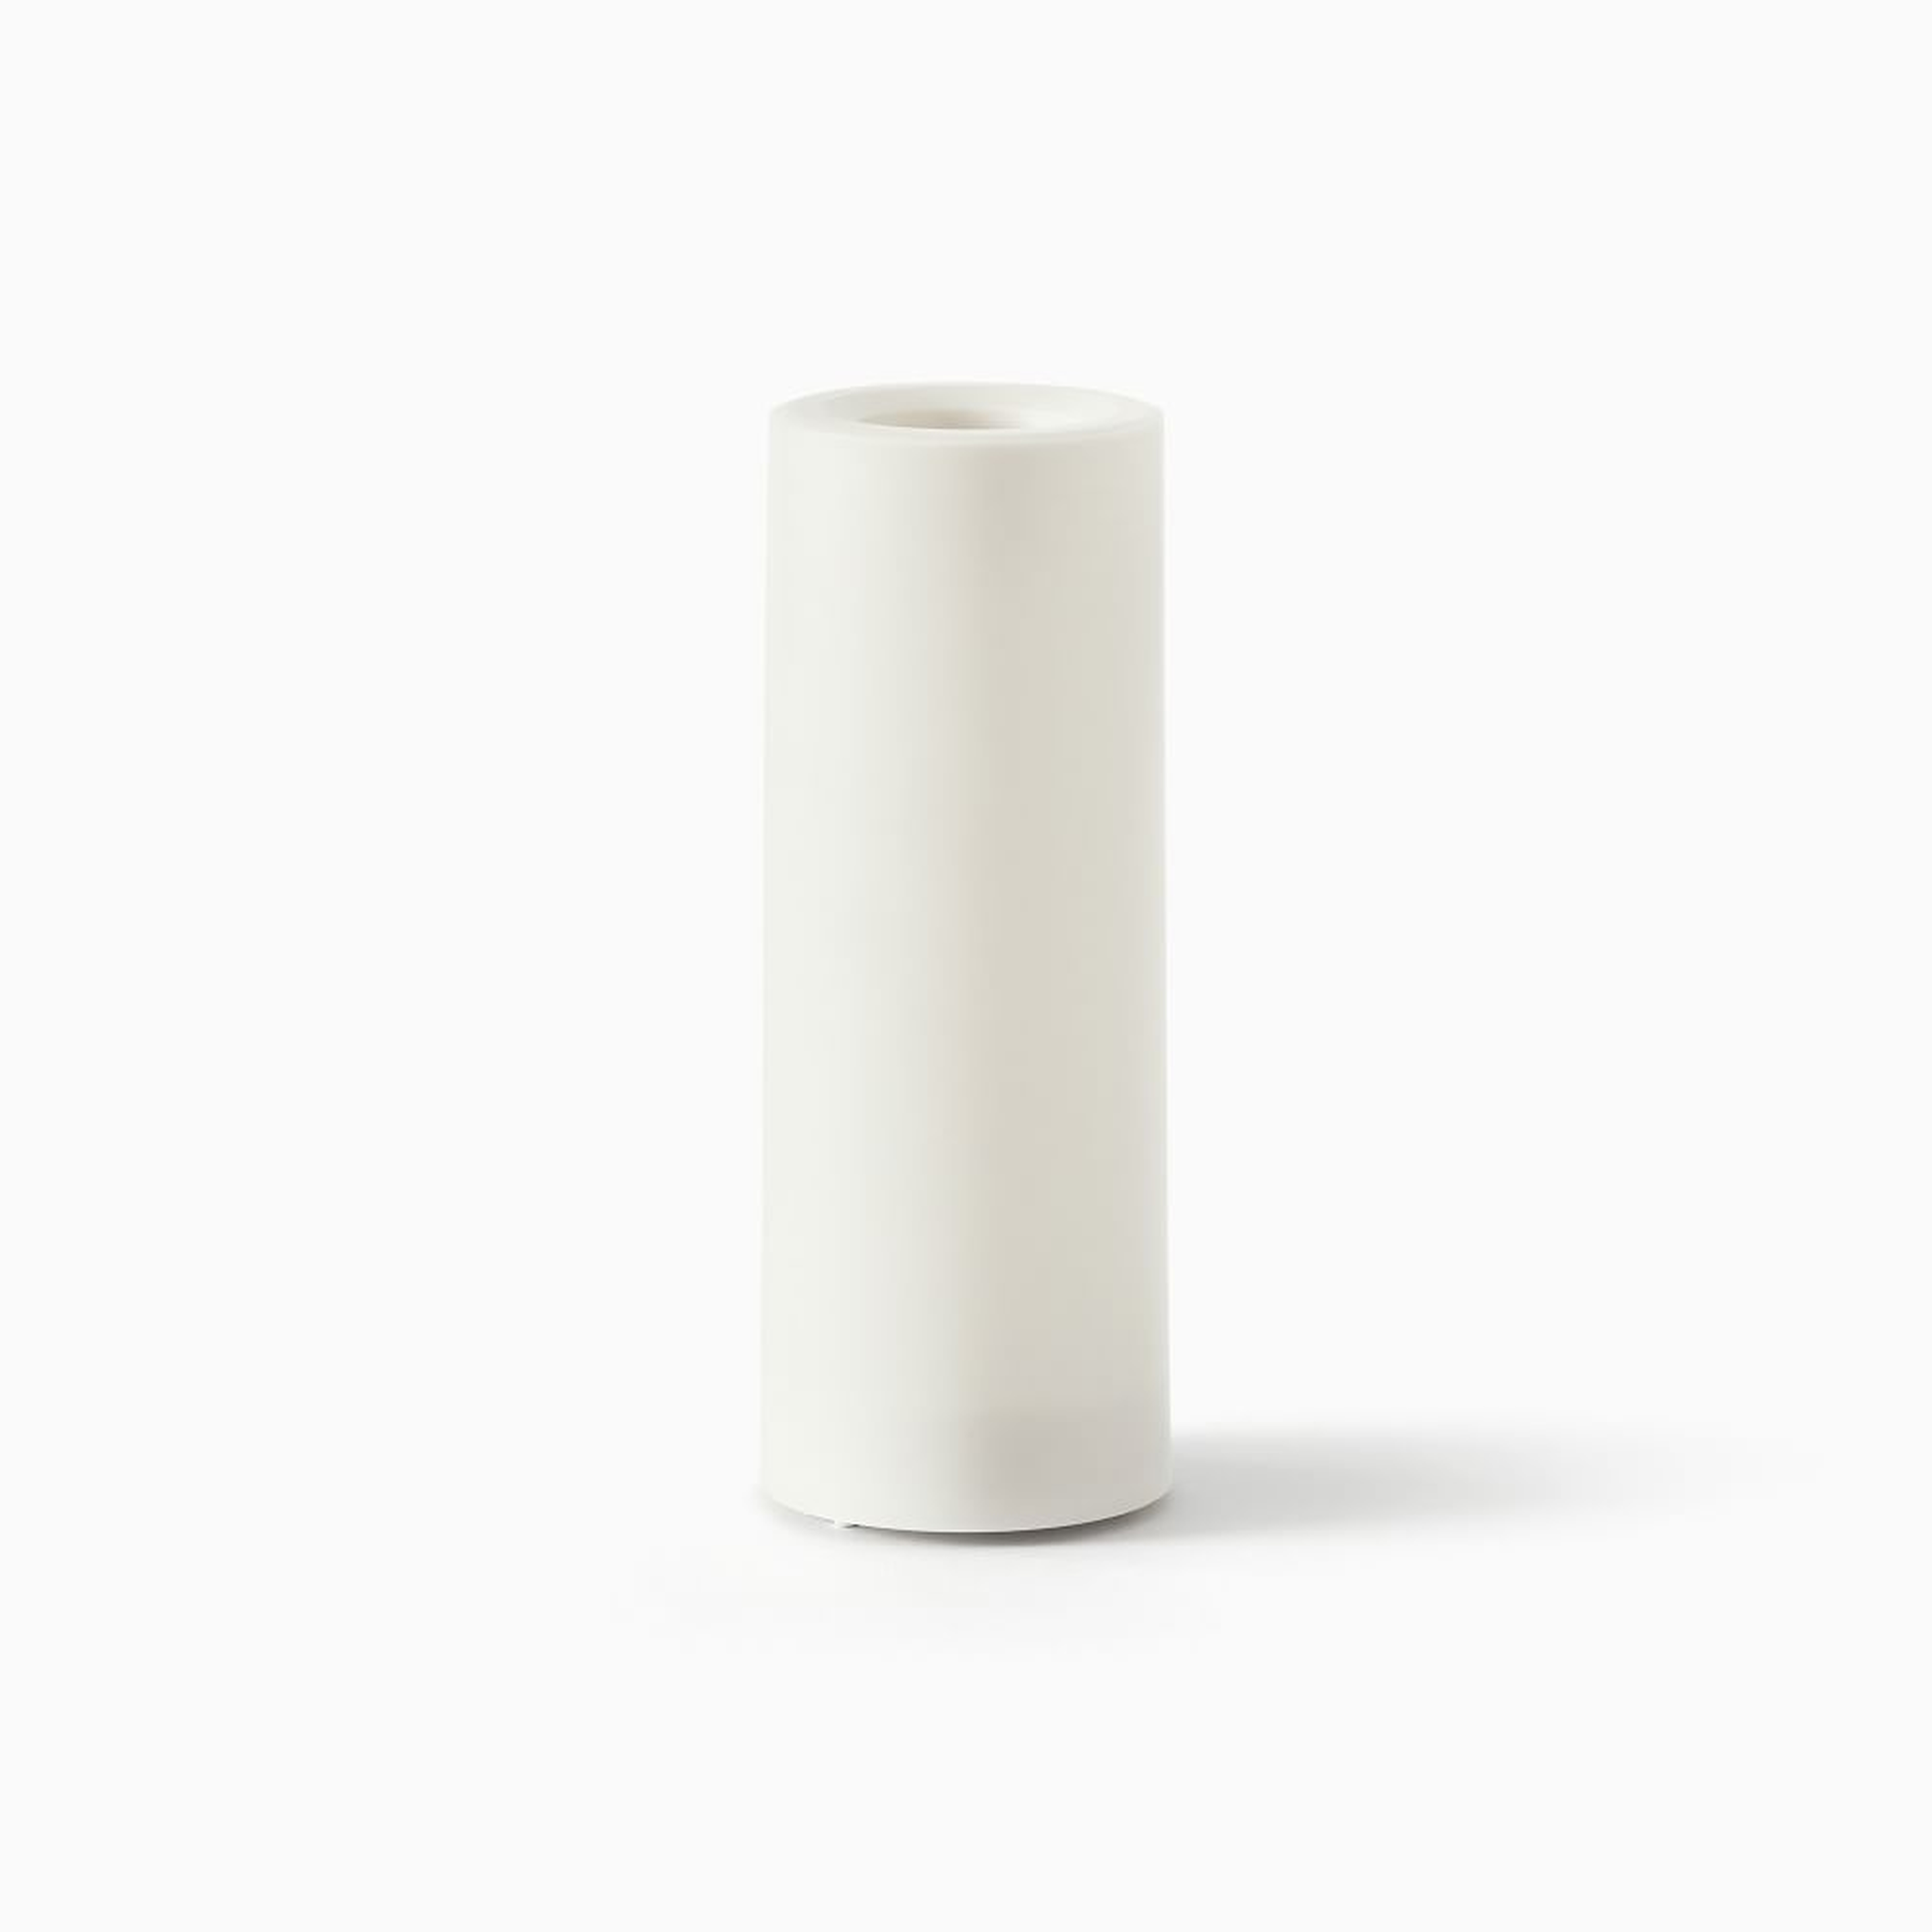 Flat Top Flicker Flameless Basic Candle, 3x8, 1 Wick, Unscented, White - West Elm